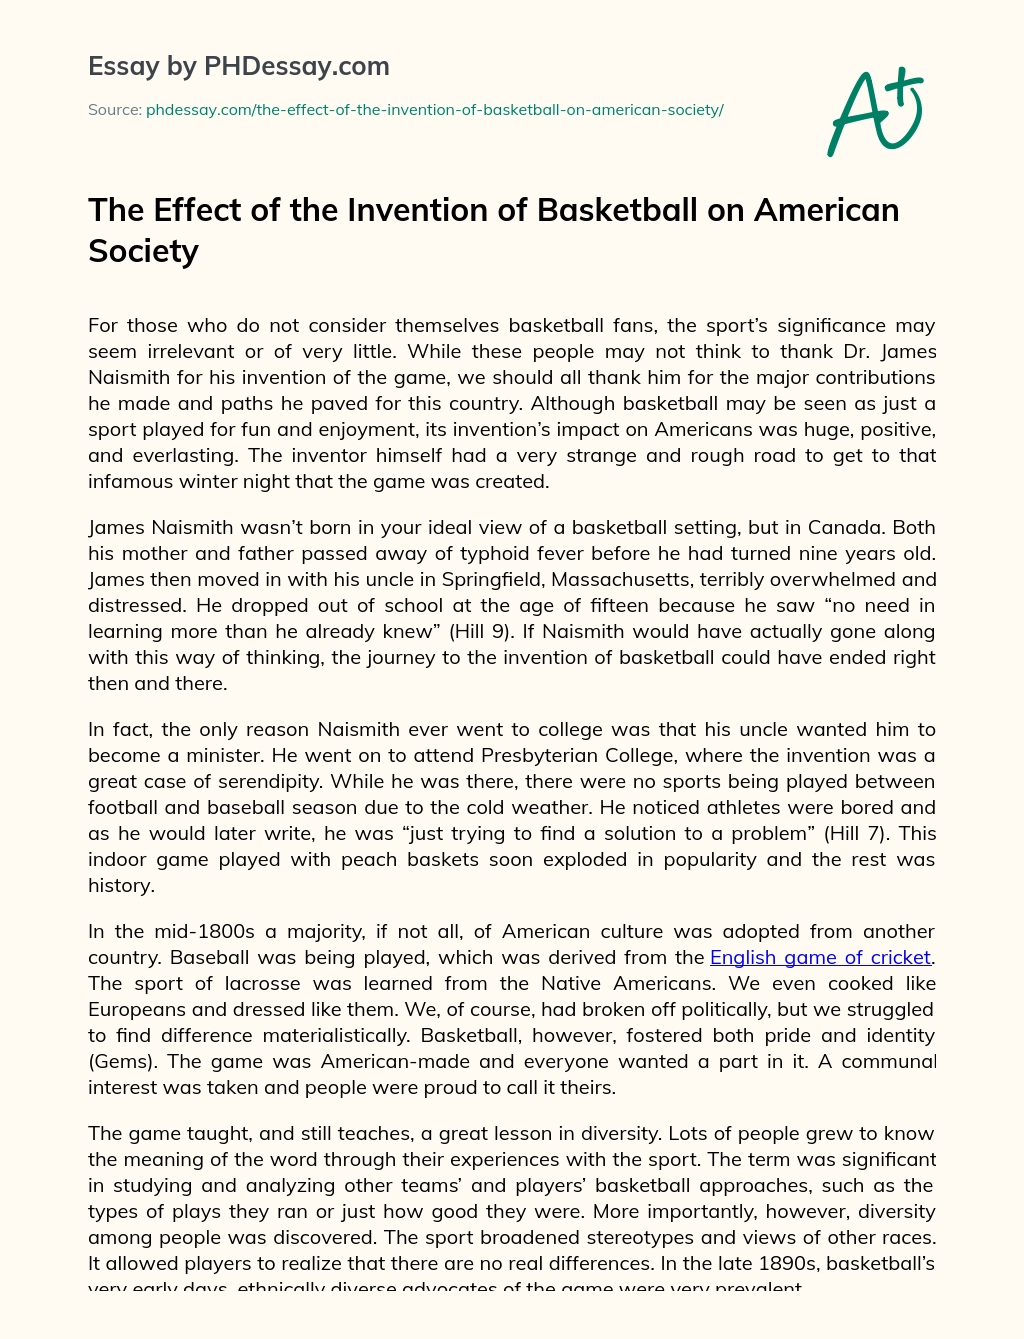 The Effect of the Invention of Basketball on American Society essay